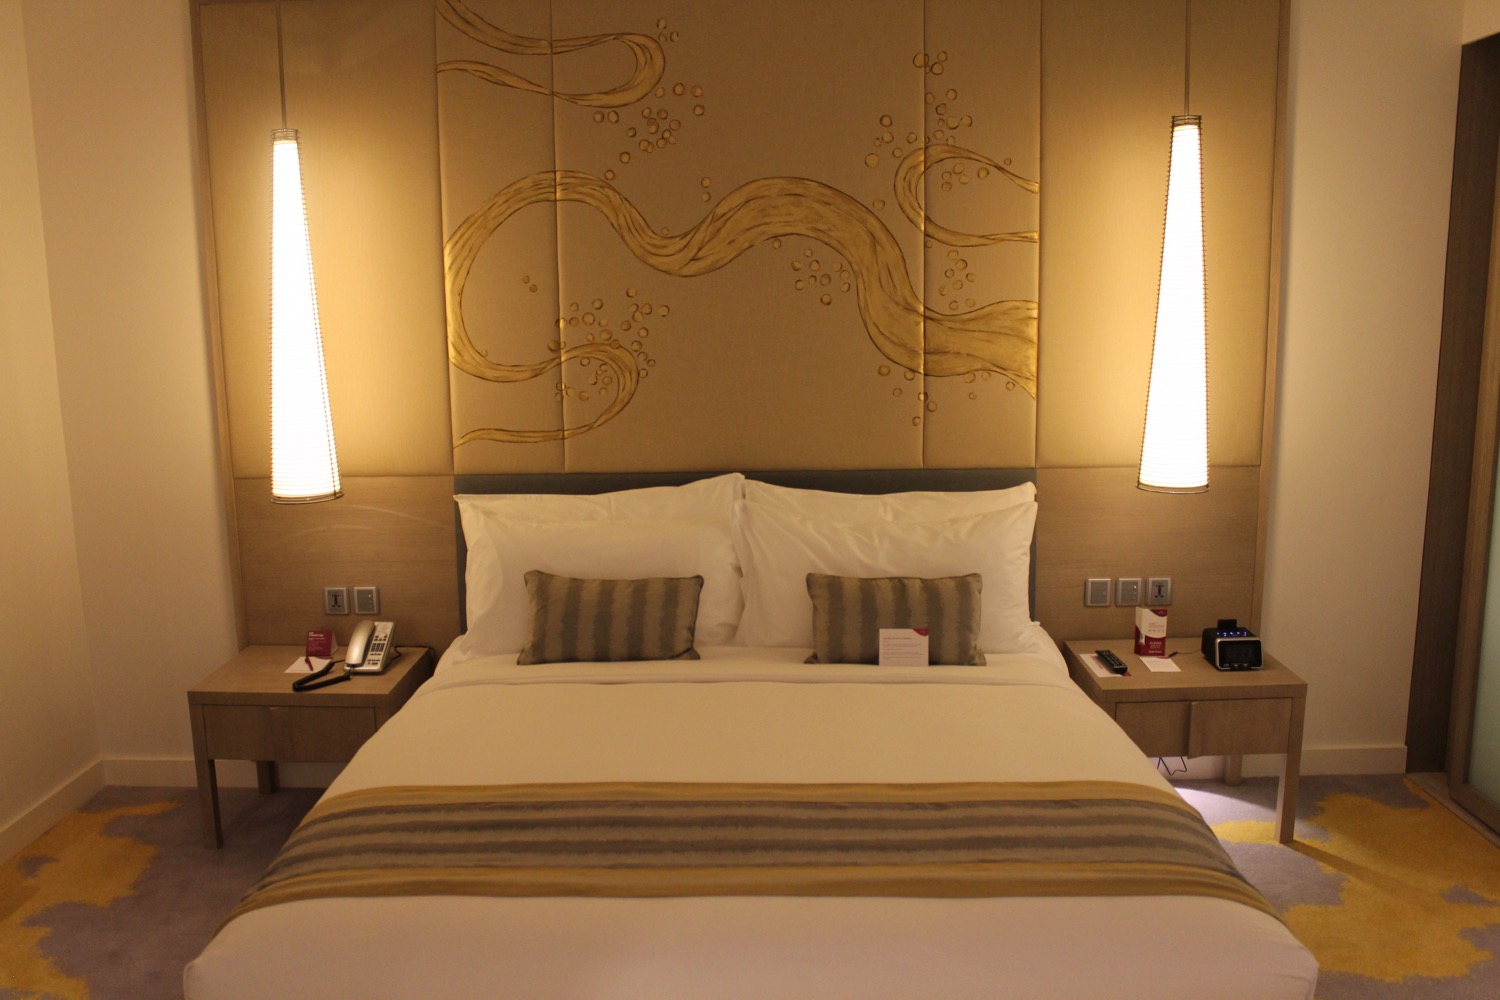 a bed with two lamps above it